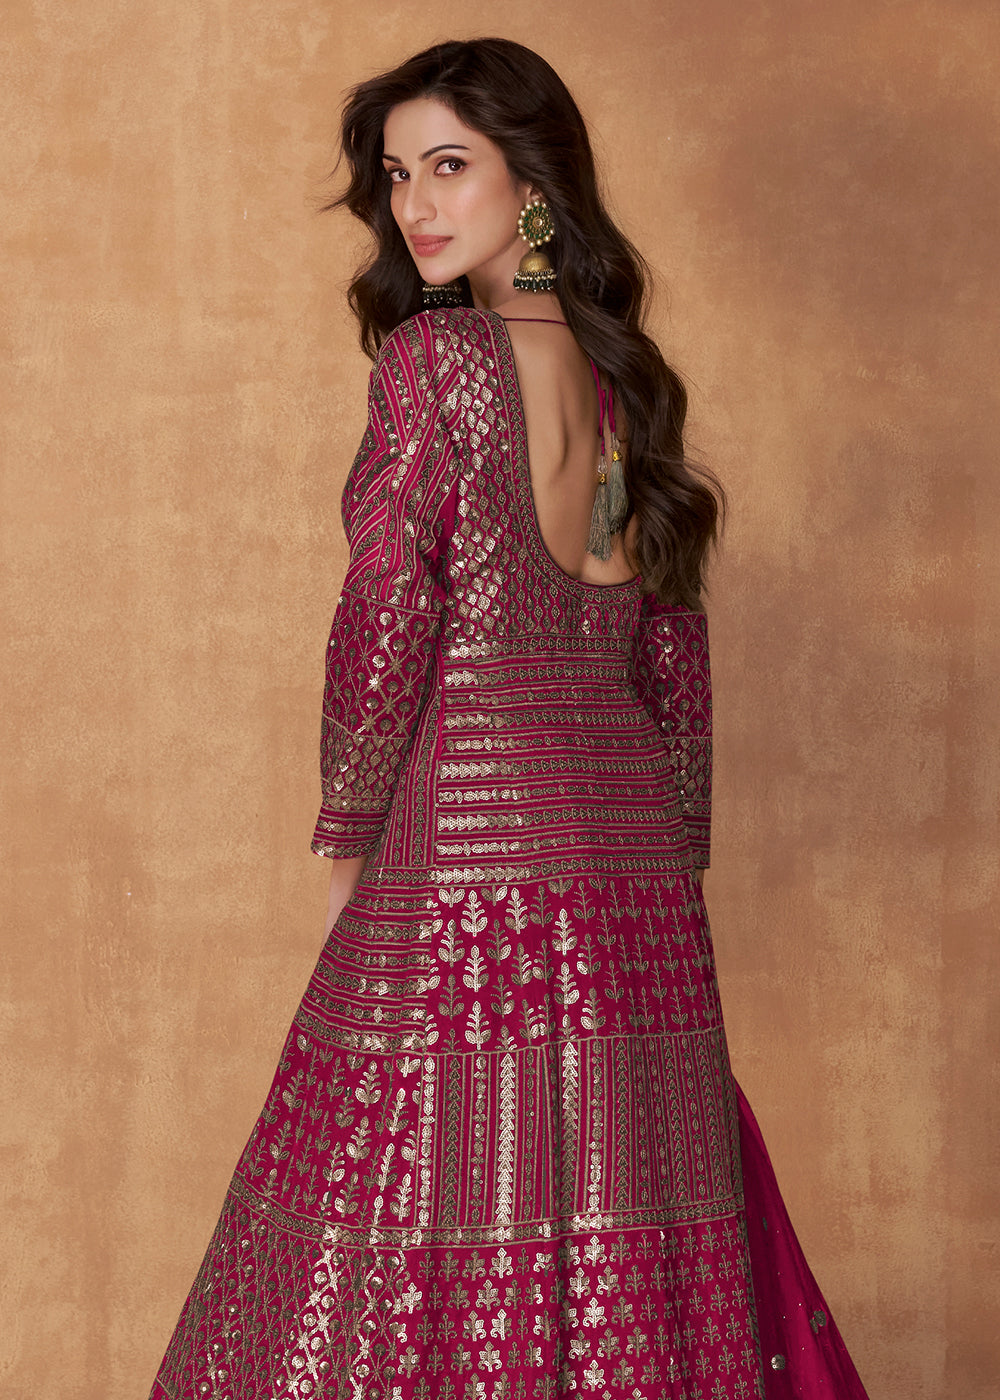 Buy Now Magenta Pink Skirt Style Embroidered Wedding Anarkali Suit Online in USA, UK, Australia, New Zealand, Canada & Worldwide at Empress Clothing. 